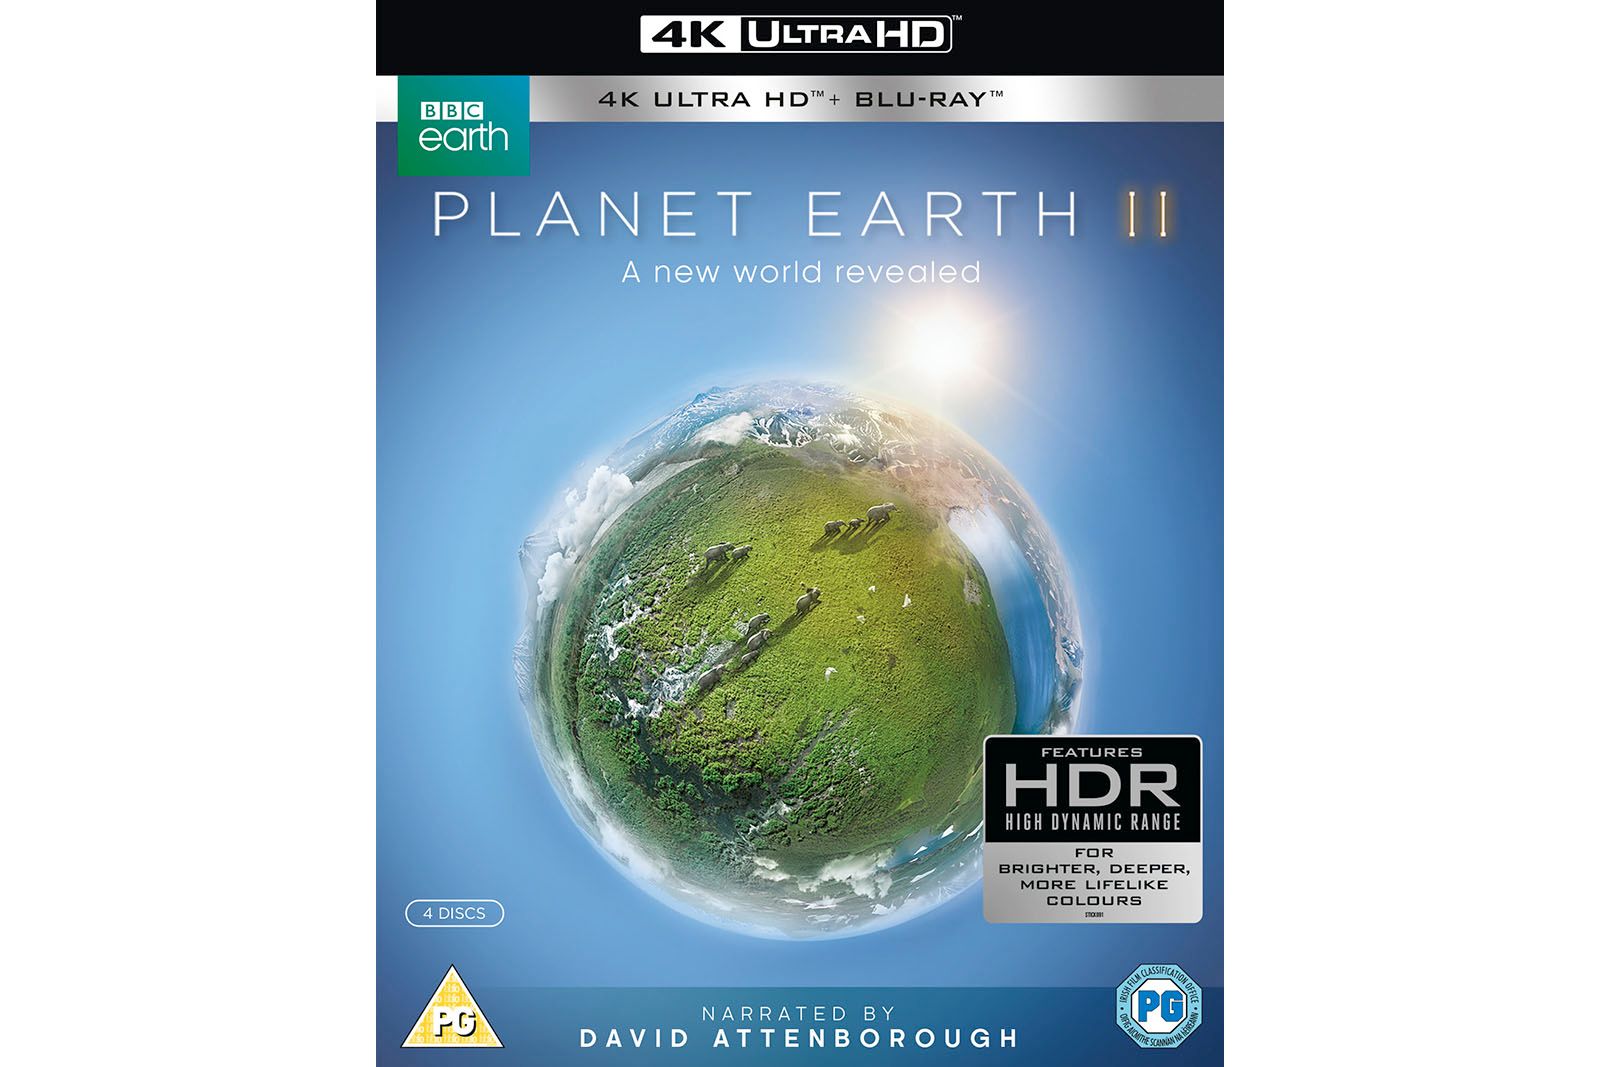 planet earth ii 4k ultra hd blu ray in hdr how to watch it and what to expect image 2